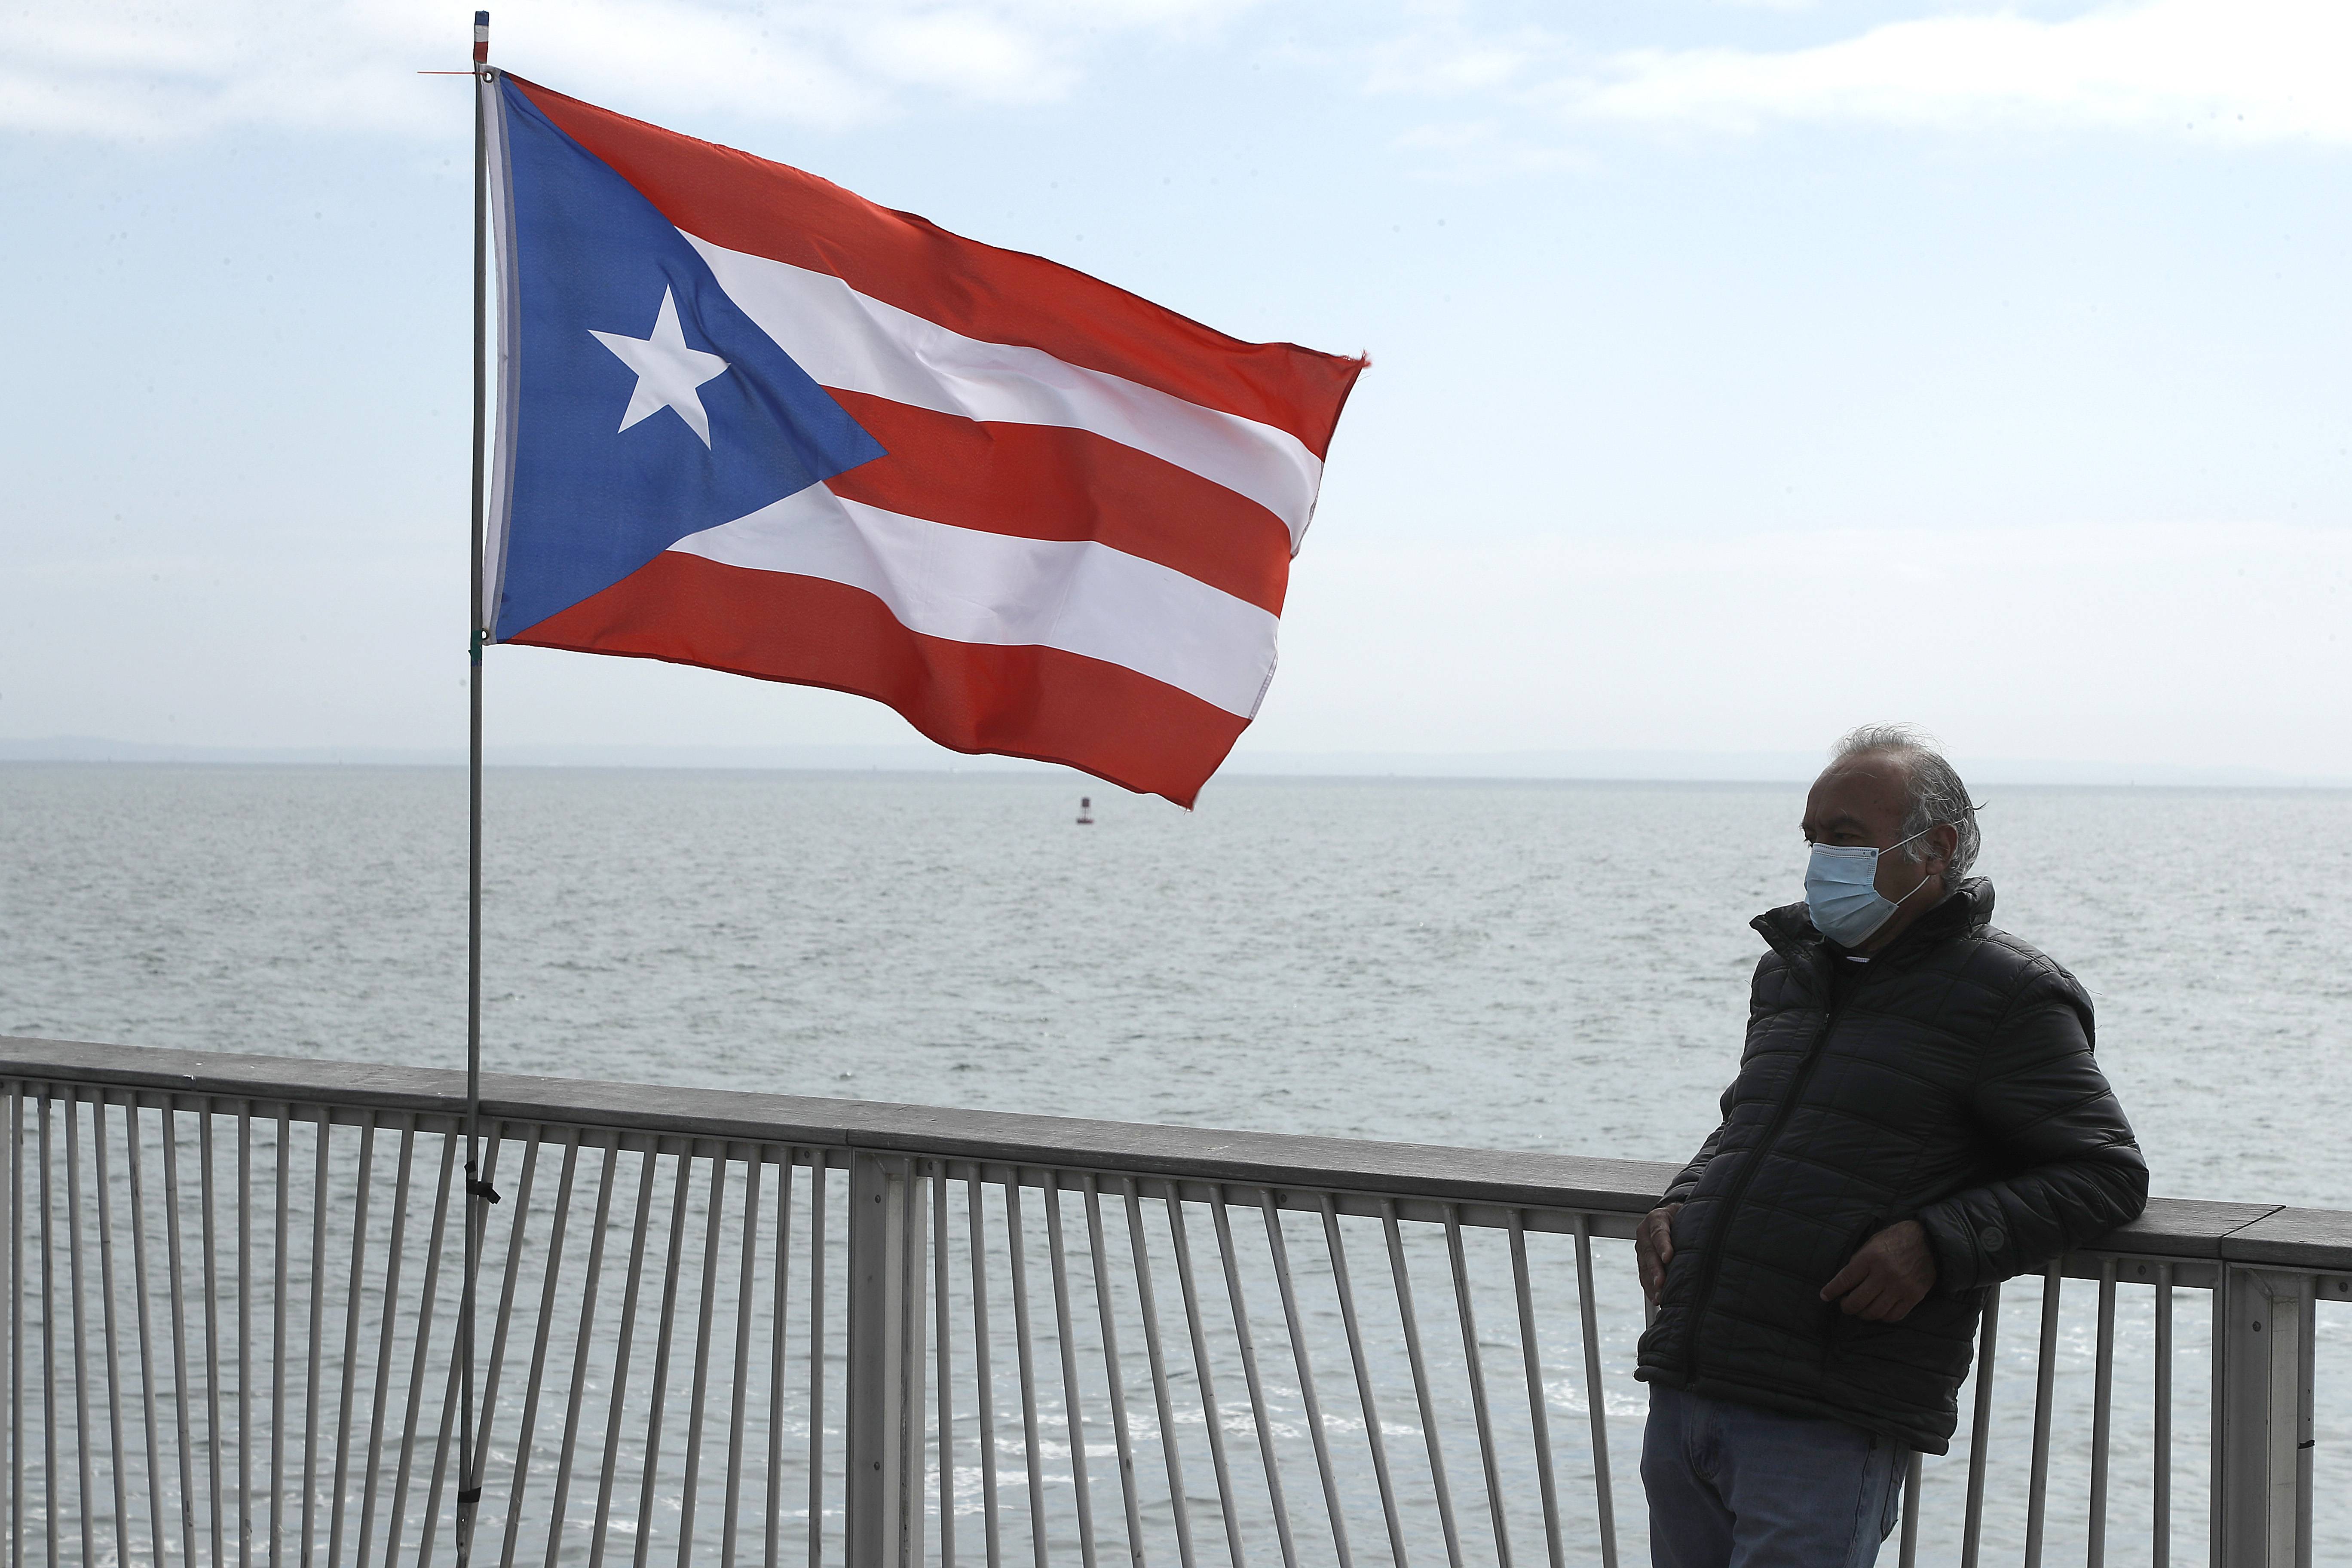 NEW YORK, NEW YORK - MAY 25: A man waring a protective mask stands next to a Puerto Rican flag on Coney Island pier during the coronavirus pandemic on May 25, 2020 in Brooklyn Borough of New York City. Government guidelines encourage wearing a mask in public with strong social distancing in effect as all 50 states in the USA have begun a gradual process to slowly reopen after weeks of stay-at-home measures to slow the spread of COVID-19. (Photo by John Lamparski/Getty Images)